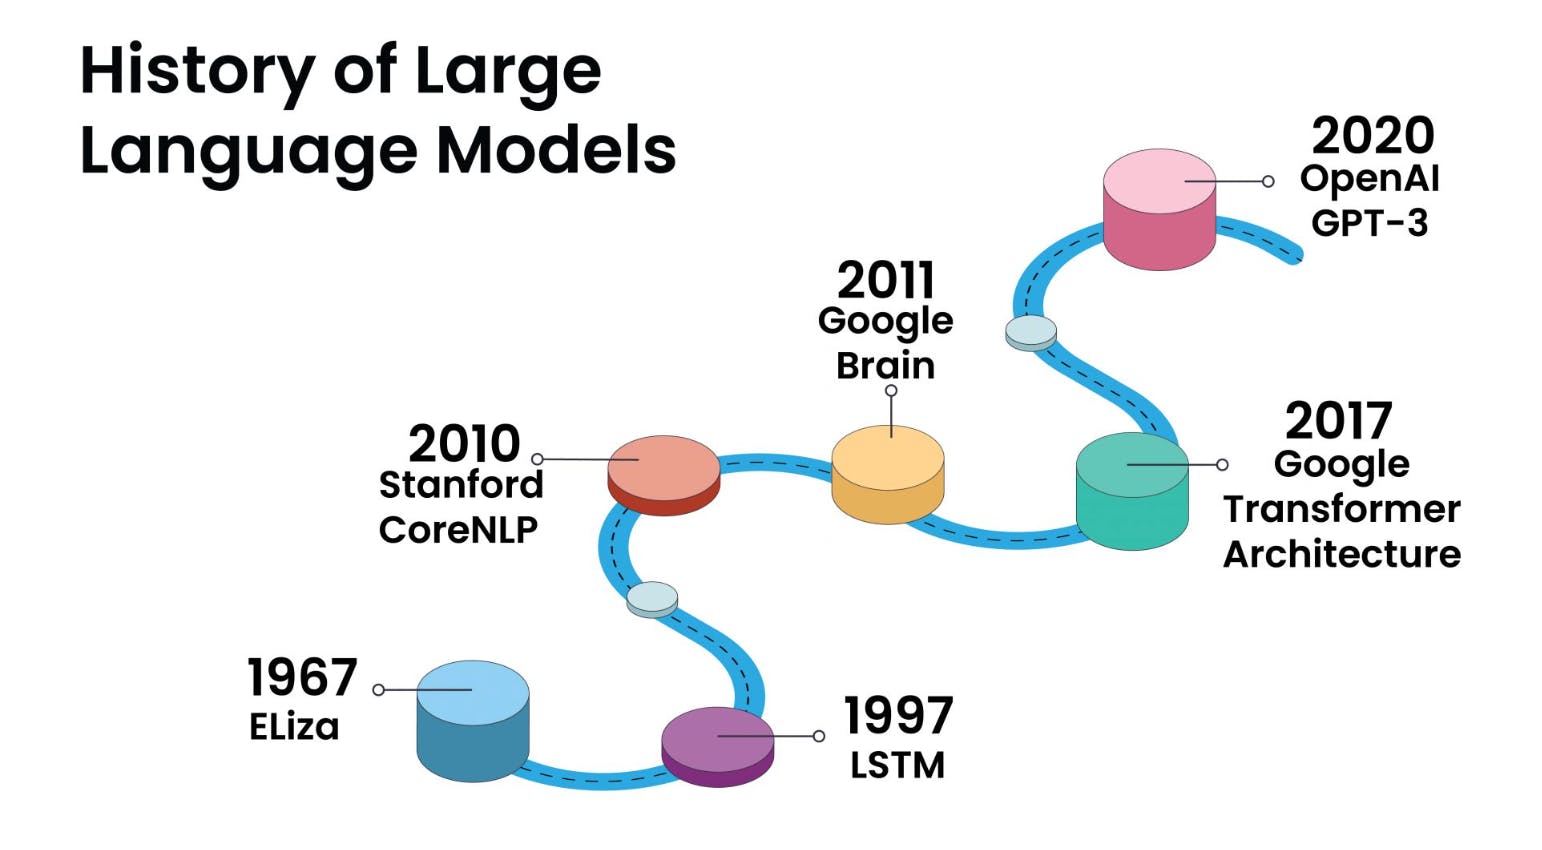 An illustration shows the history of the development of Large Language Models (LLMs)